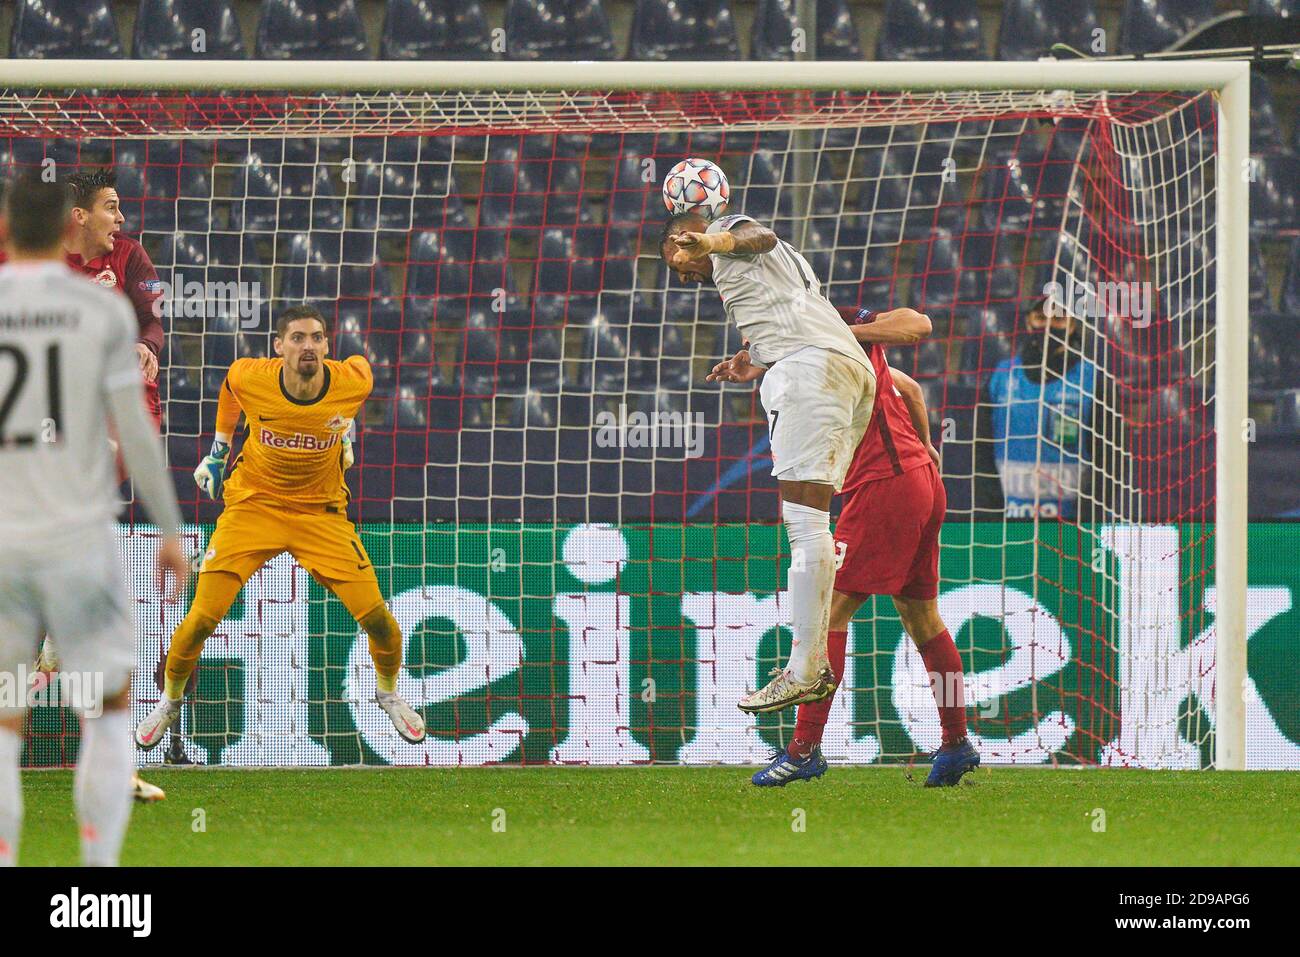 Salzburg, Austria, November 3, 2020.Jerome BOATENG (FCB 17)   scores, shoots goal for , Tor, Treffer, 2-3 in the match  FC SALZBURG - FC BAYERN MUENCHEN  of football UEFA Champions League group stage in season 2020/2021 in Salzburg, Austria, November 3, 2020.   © Peter Schatz / Alamy Live News  Important: National and international News-Agencies OUT Editorial Use ONLY Credit: Peter Schatz/Alamy Live News Stock Photo